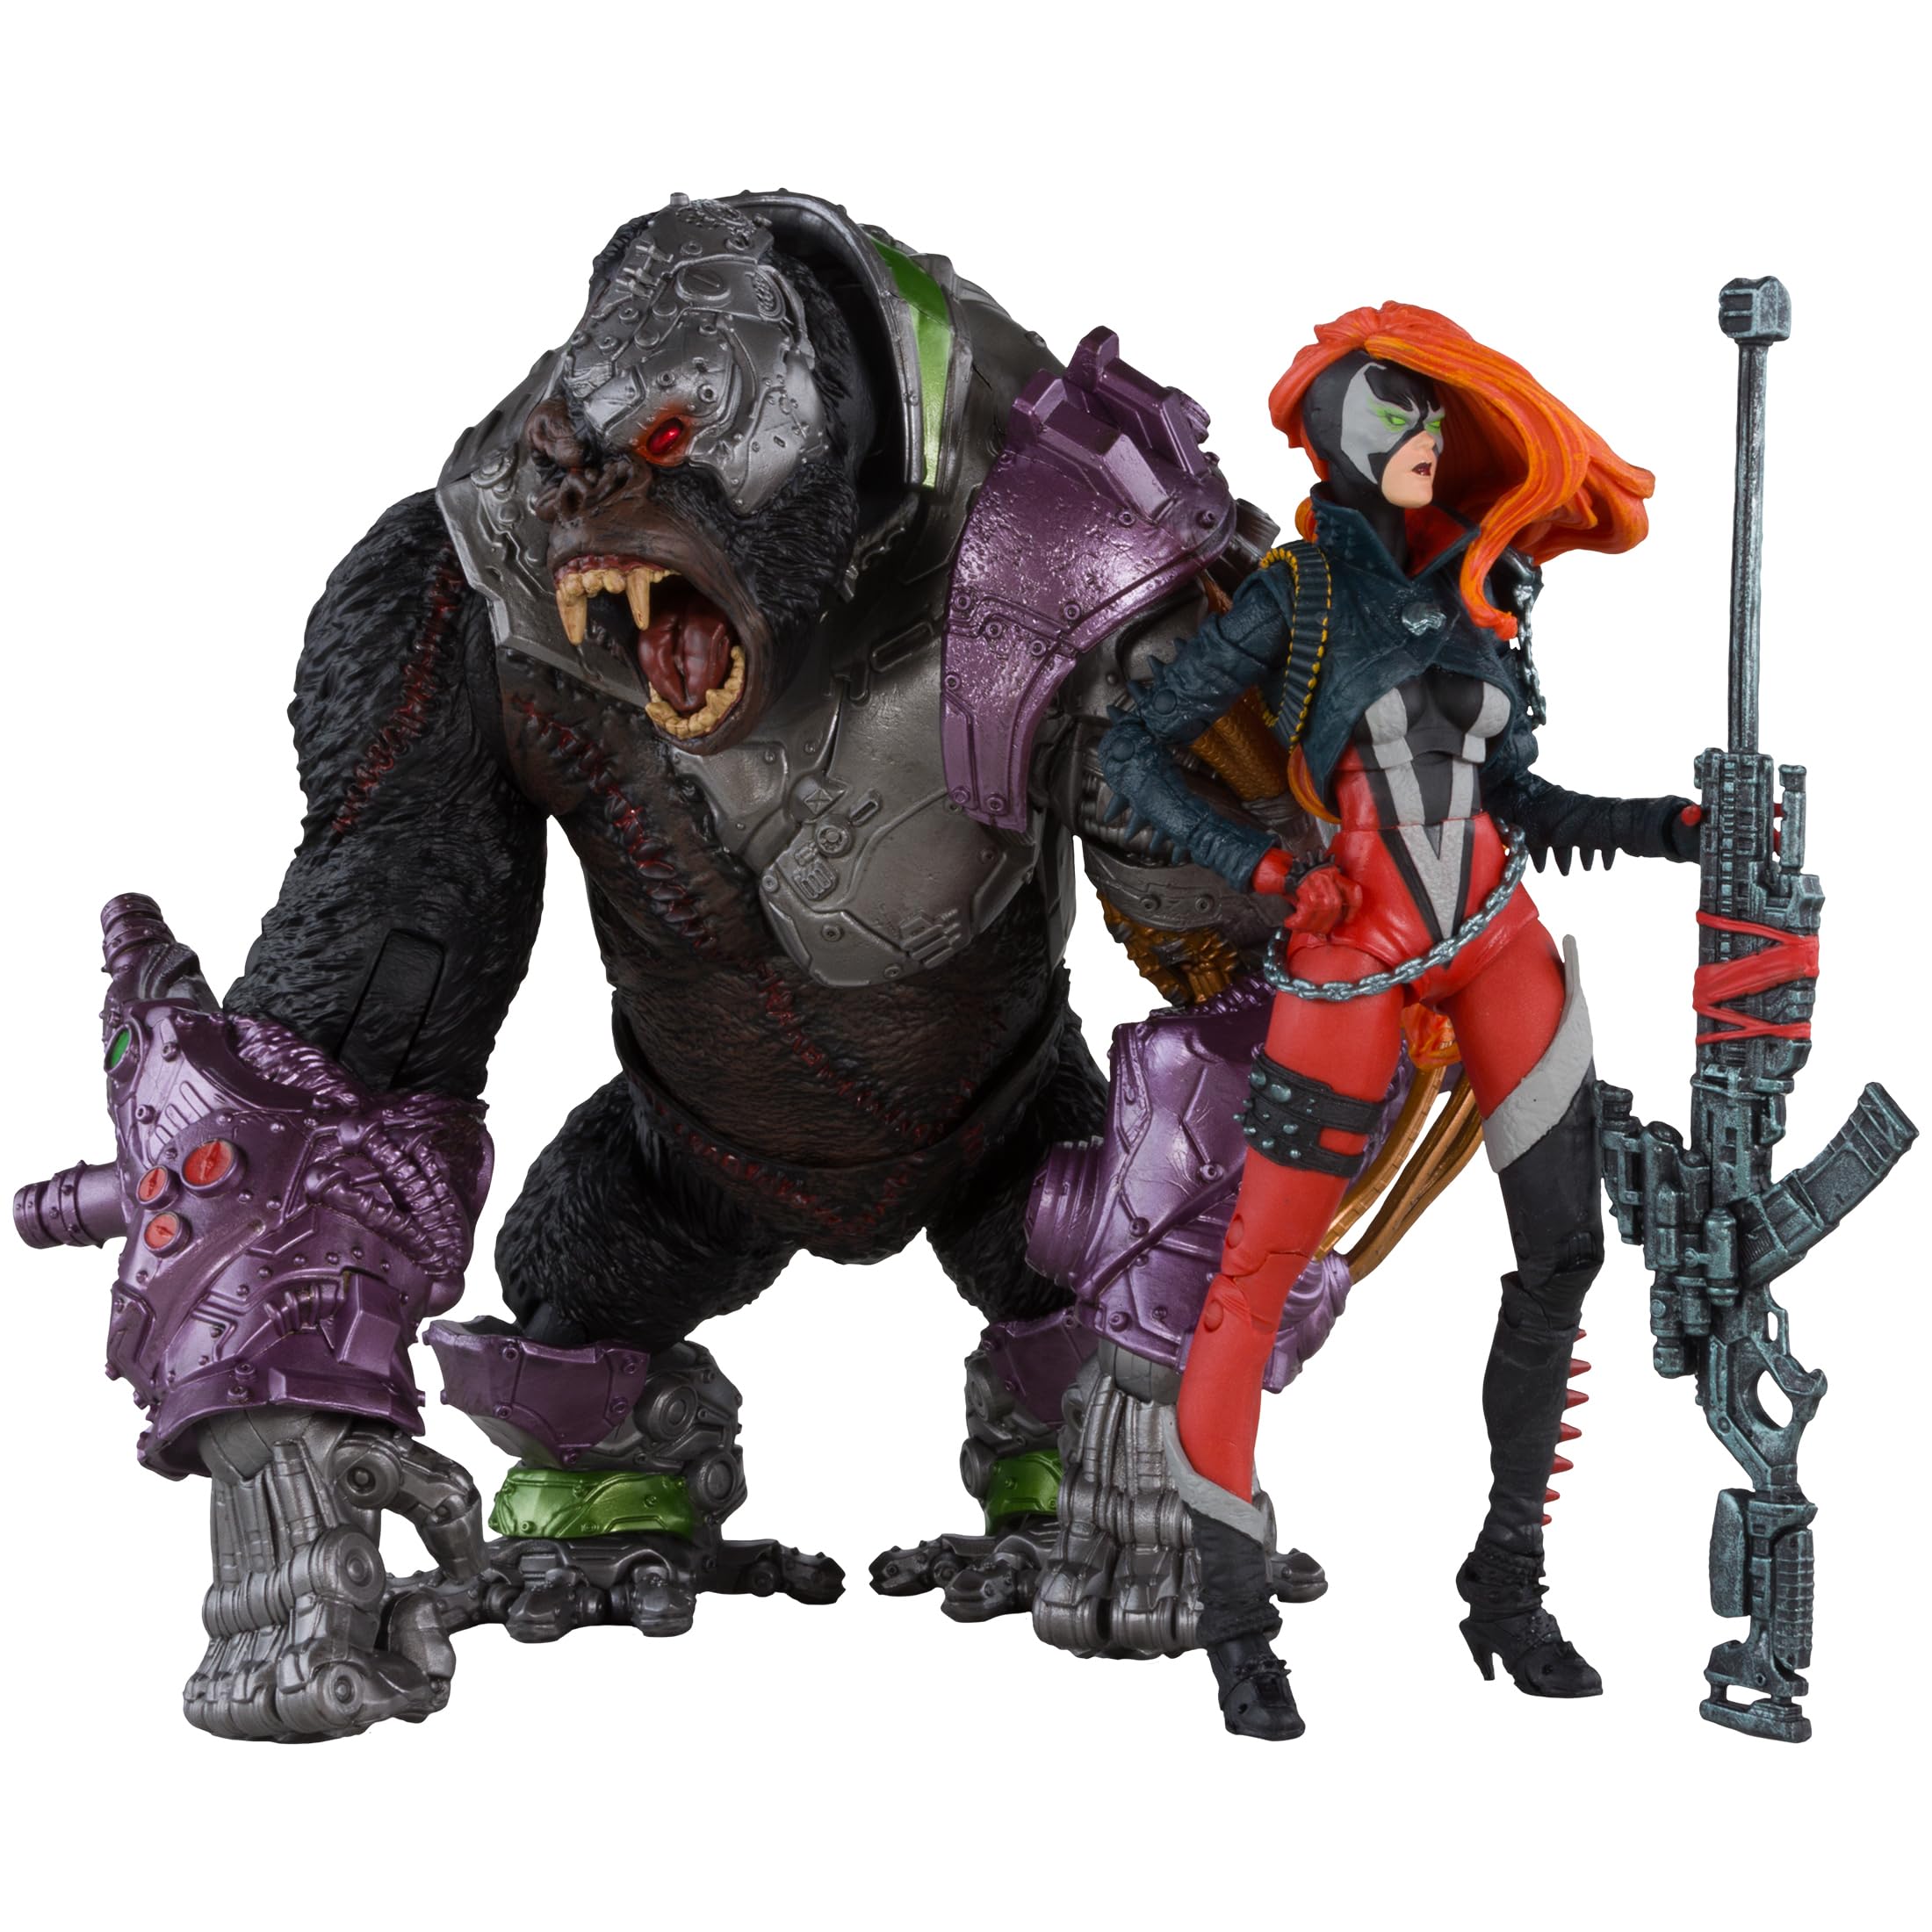 2-Pack 7" Scale McFarlane Toys Gold Label Spawn She-Spawn & Cygor Action Figures $26.45 + Free Shipping w/ Prime or on $35+